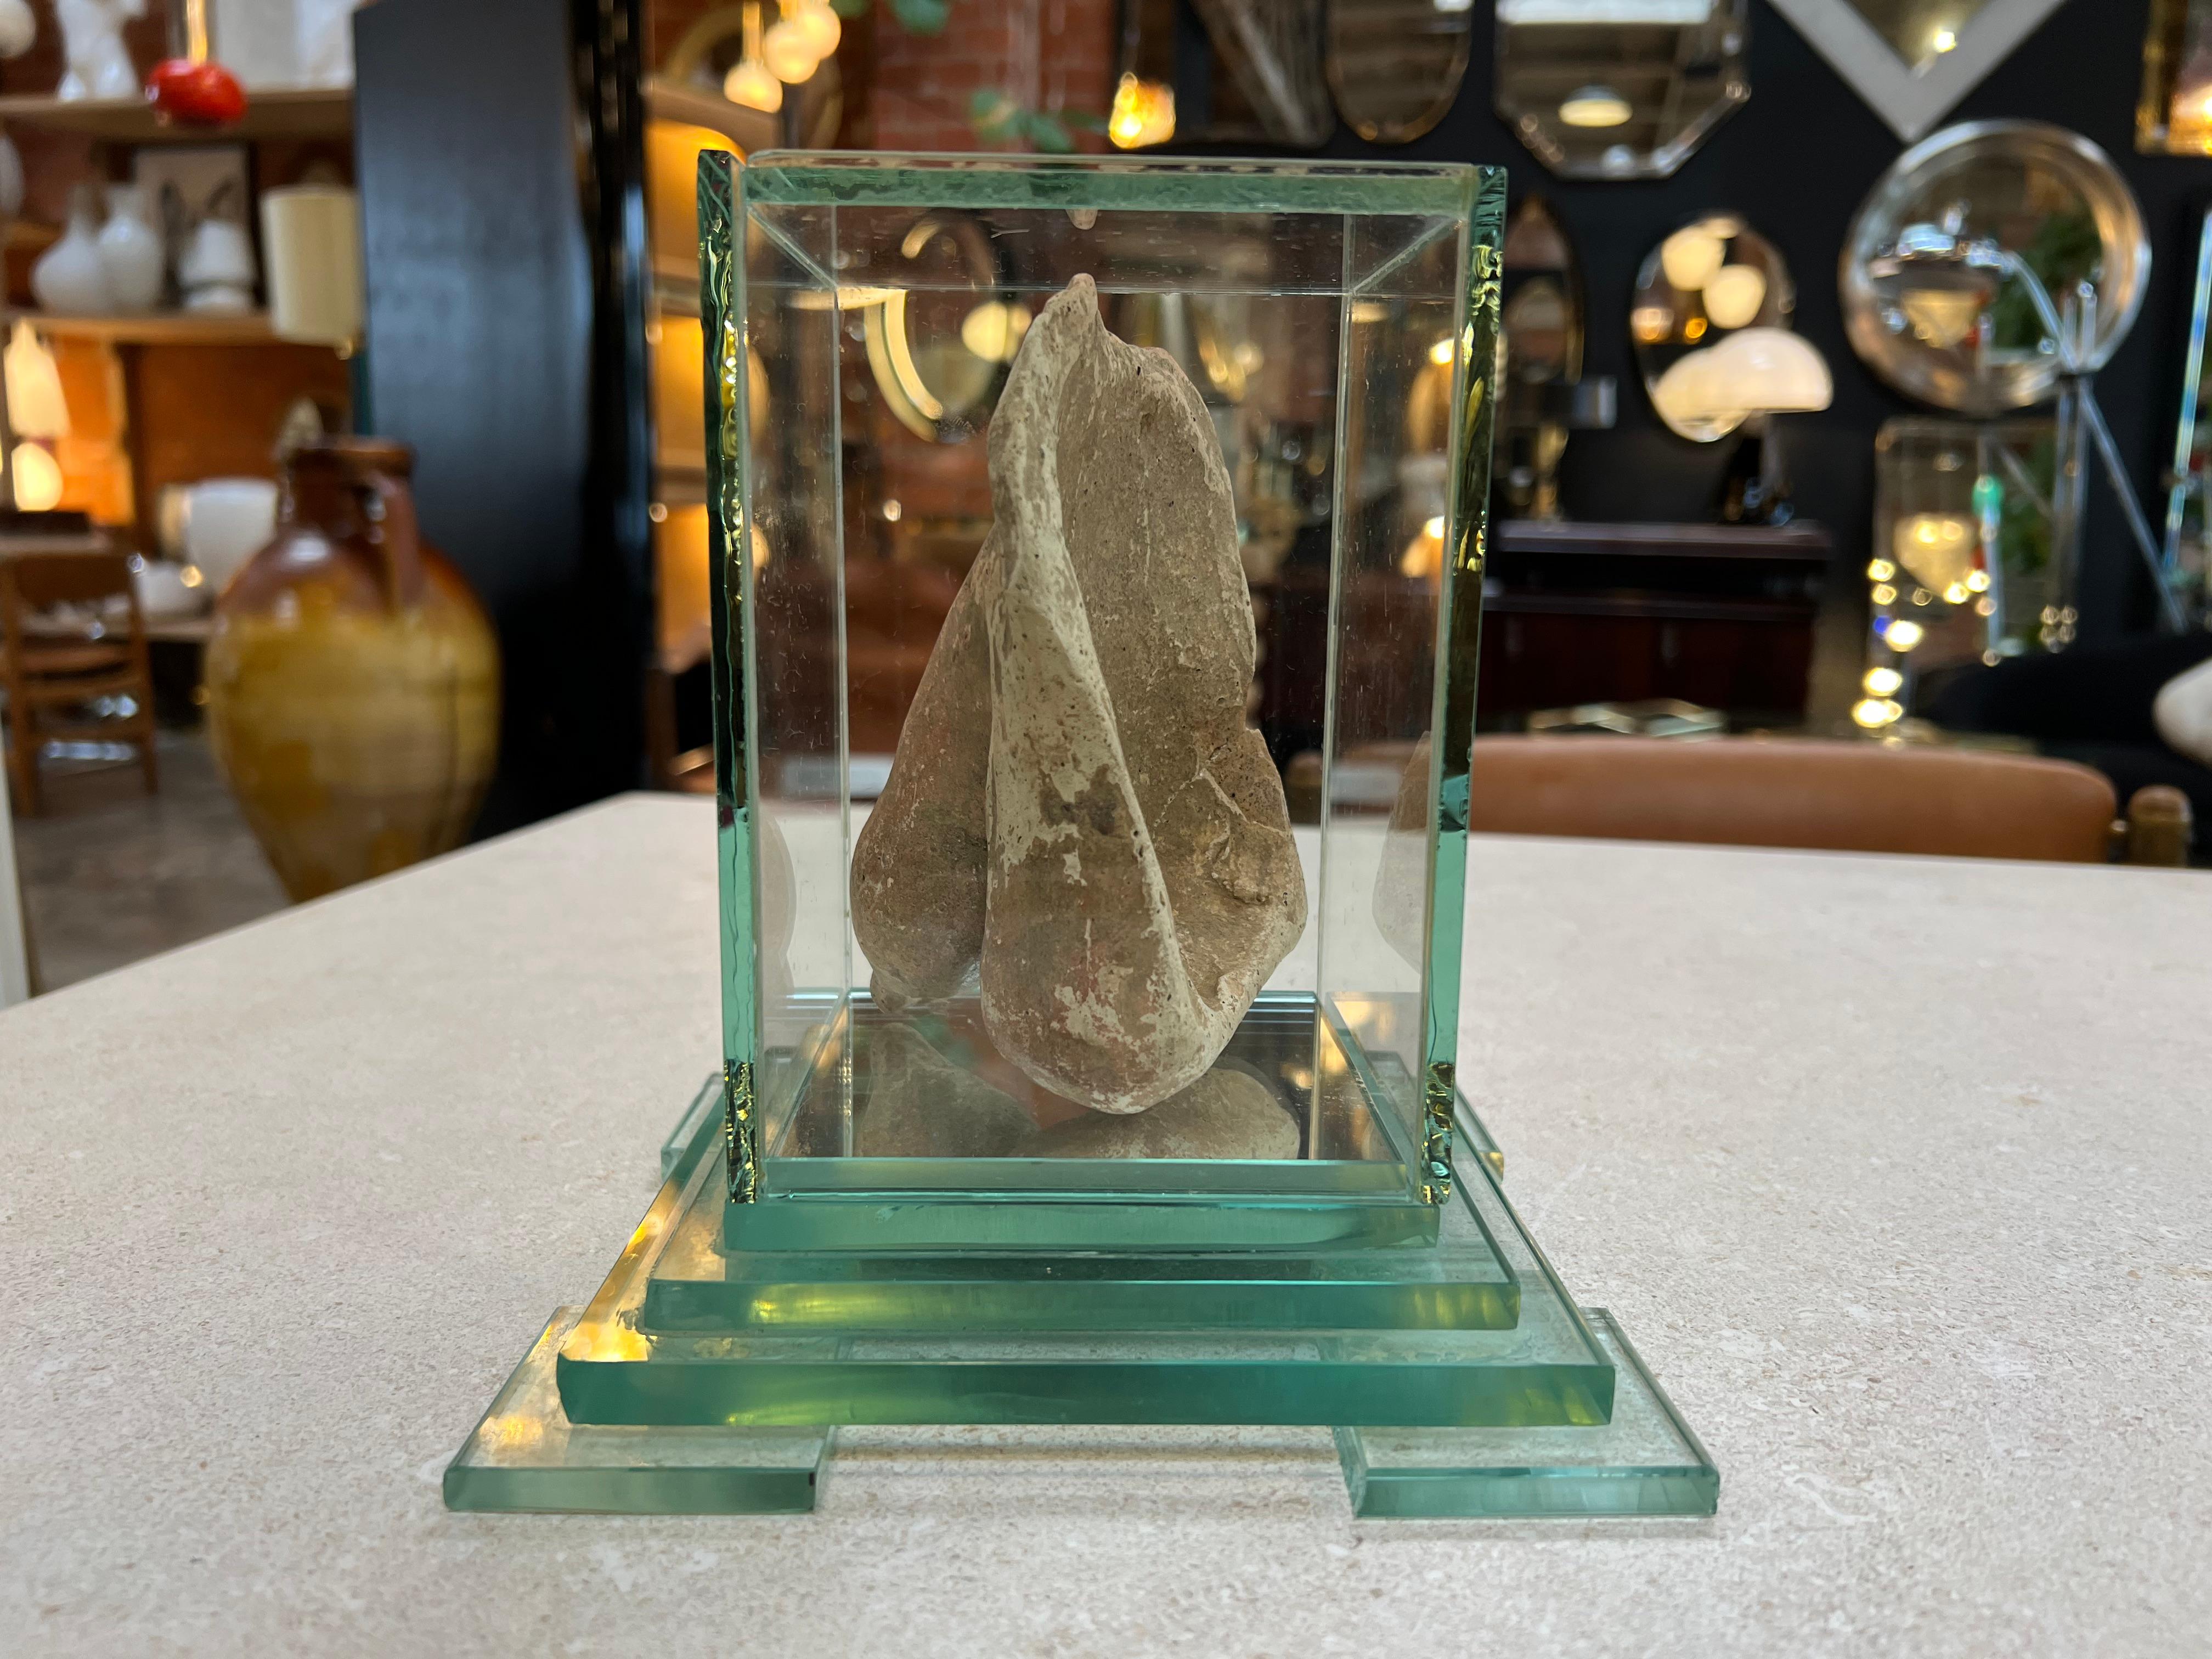 Introducing a provocative mid-century Roman sculpture from the 1940s - a daring representation of a stone penis encased in a cube of protective glass. This intriguing artwork challenges conventional norms, exploring themes of art, sexuality, and